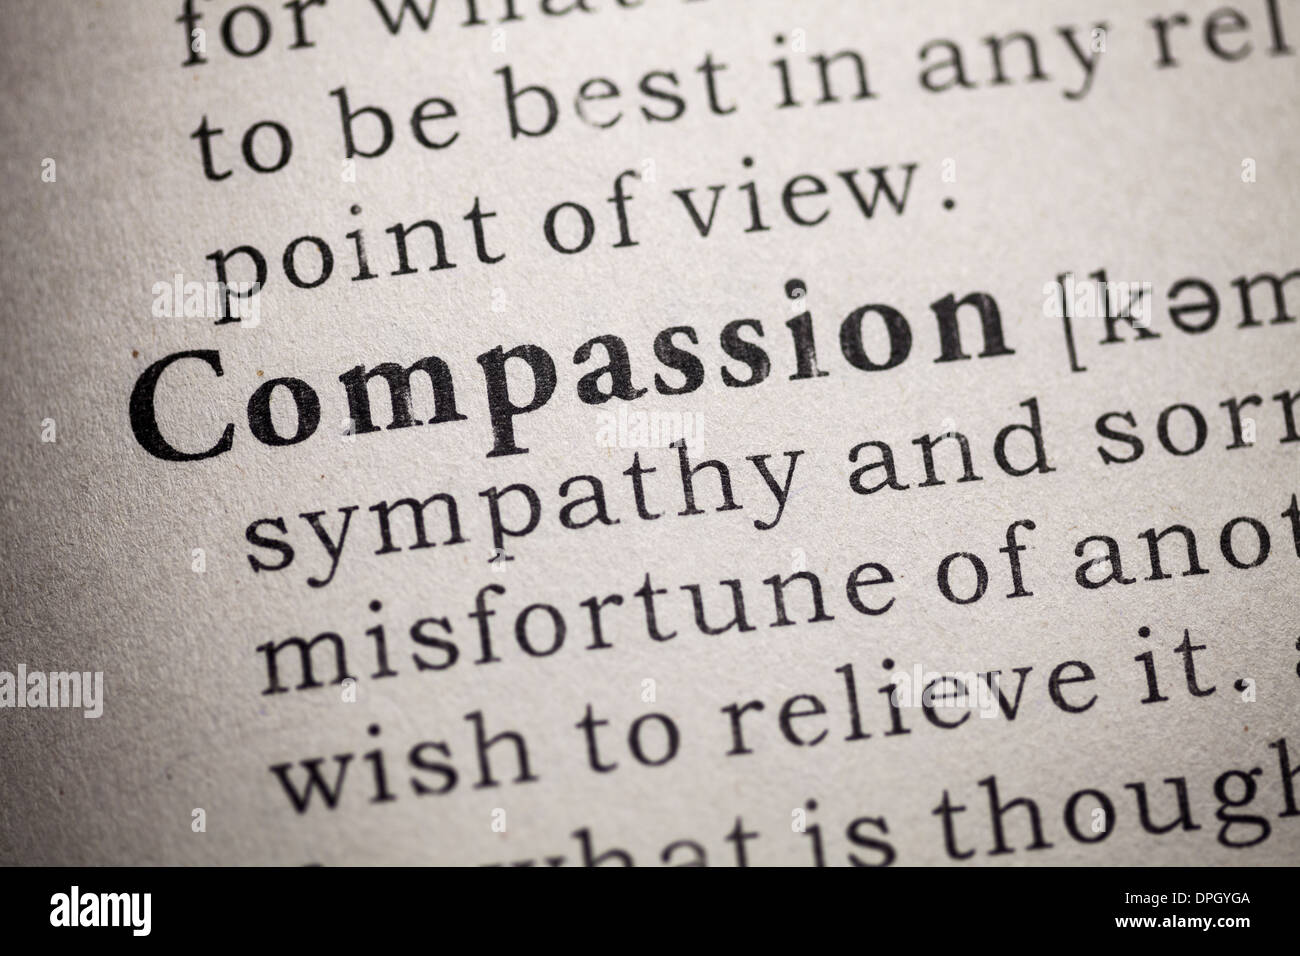 Fake Dictionary, Dictionary definition of compassion. Stock Photo